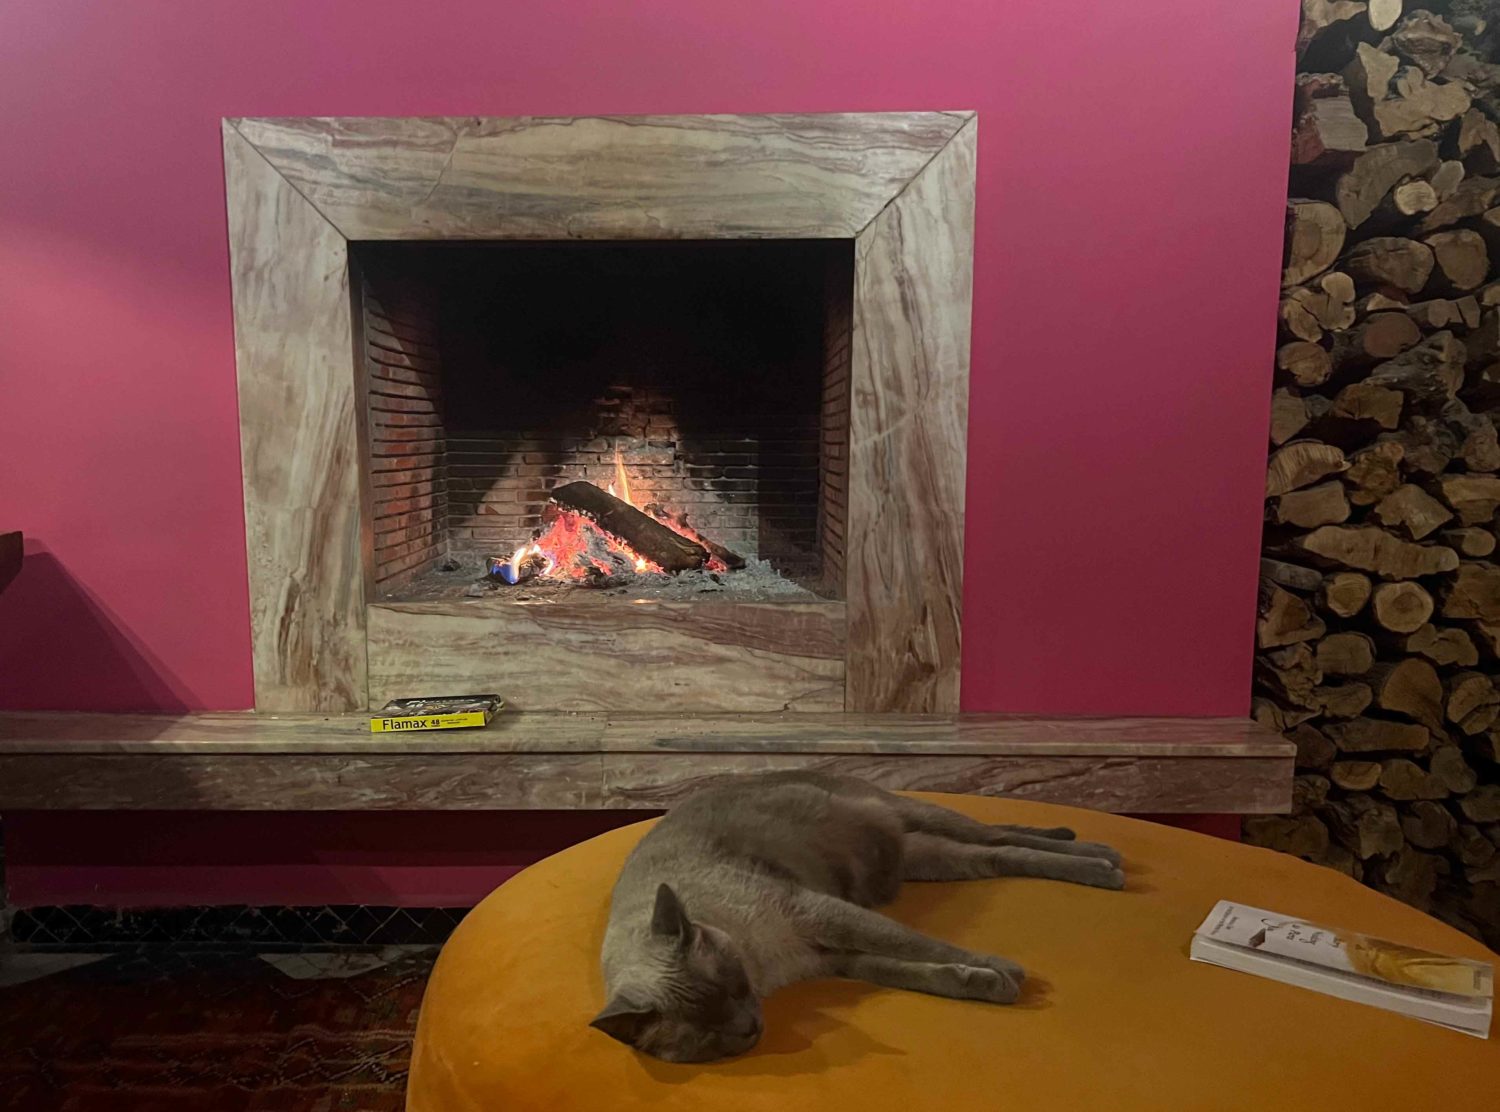 El Fenn The hotel’s resident cat was so serene by the lobby fireplace we wondered if it was real — it was